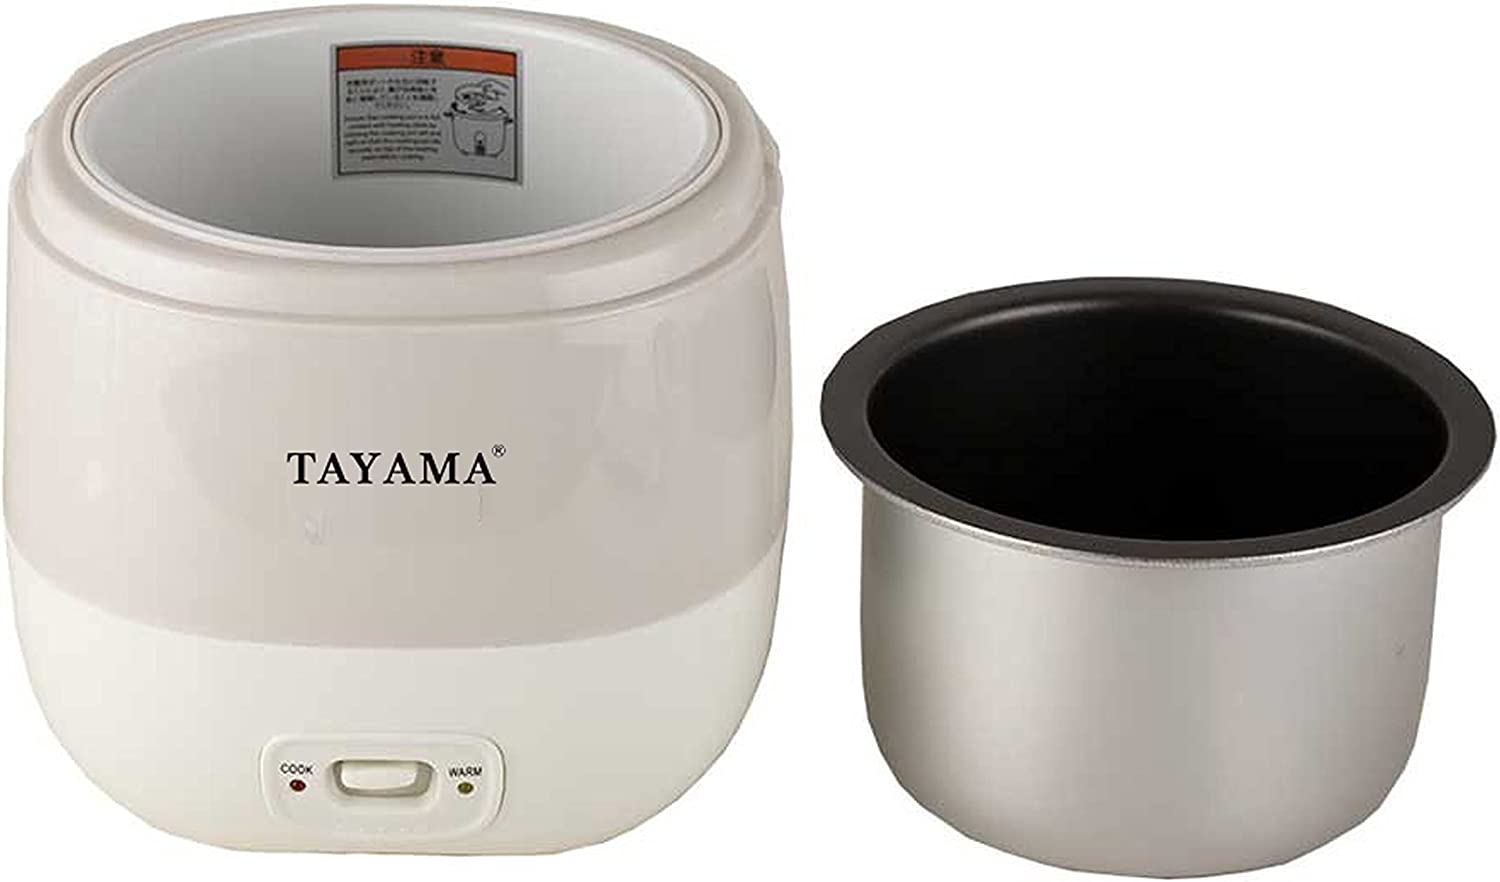 Tayama cool touch electronic rice cooker 10 cups